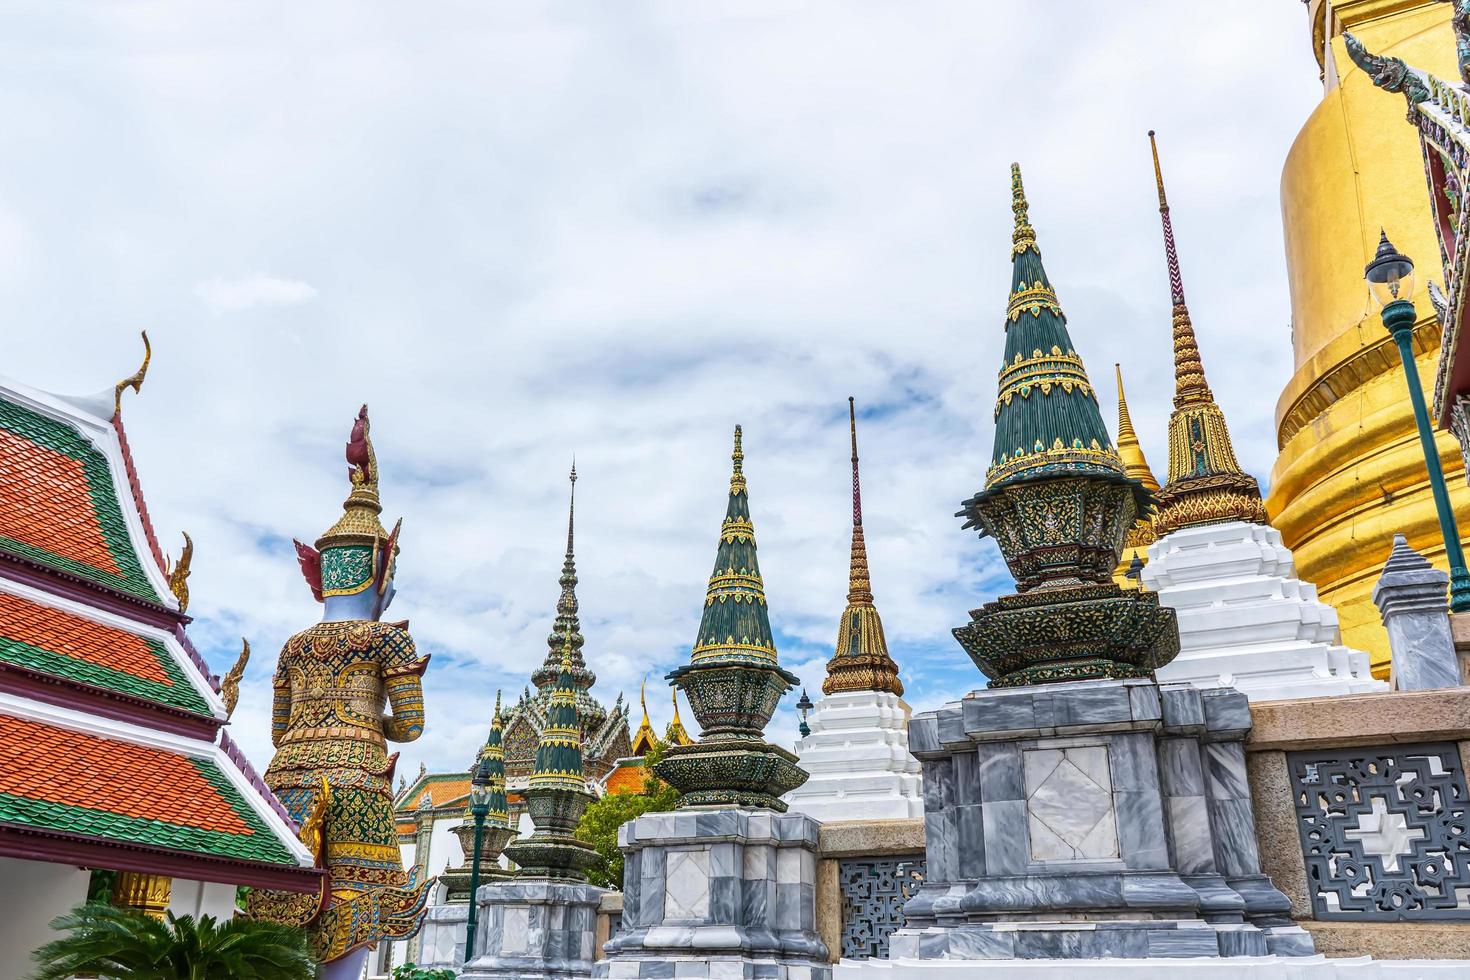 One landmark of Wat Phra Kaew in Bangkok, Thailand. A place everyone in every religion can be viewed. photo